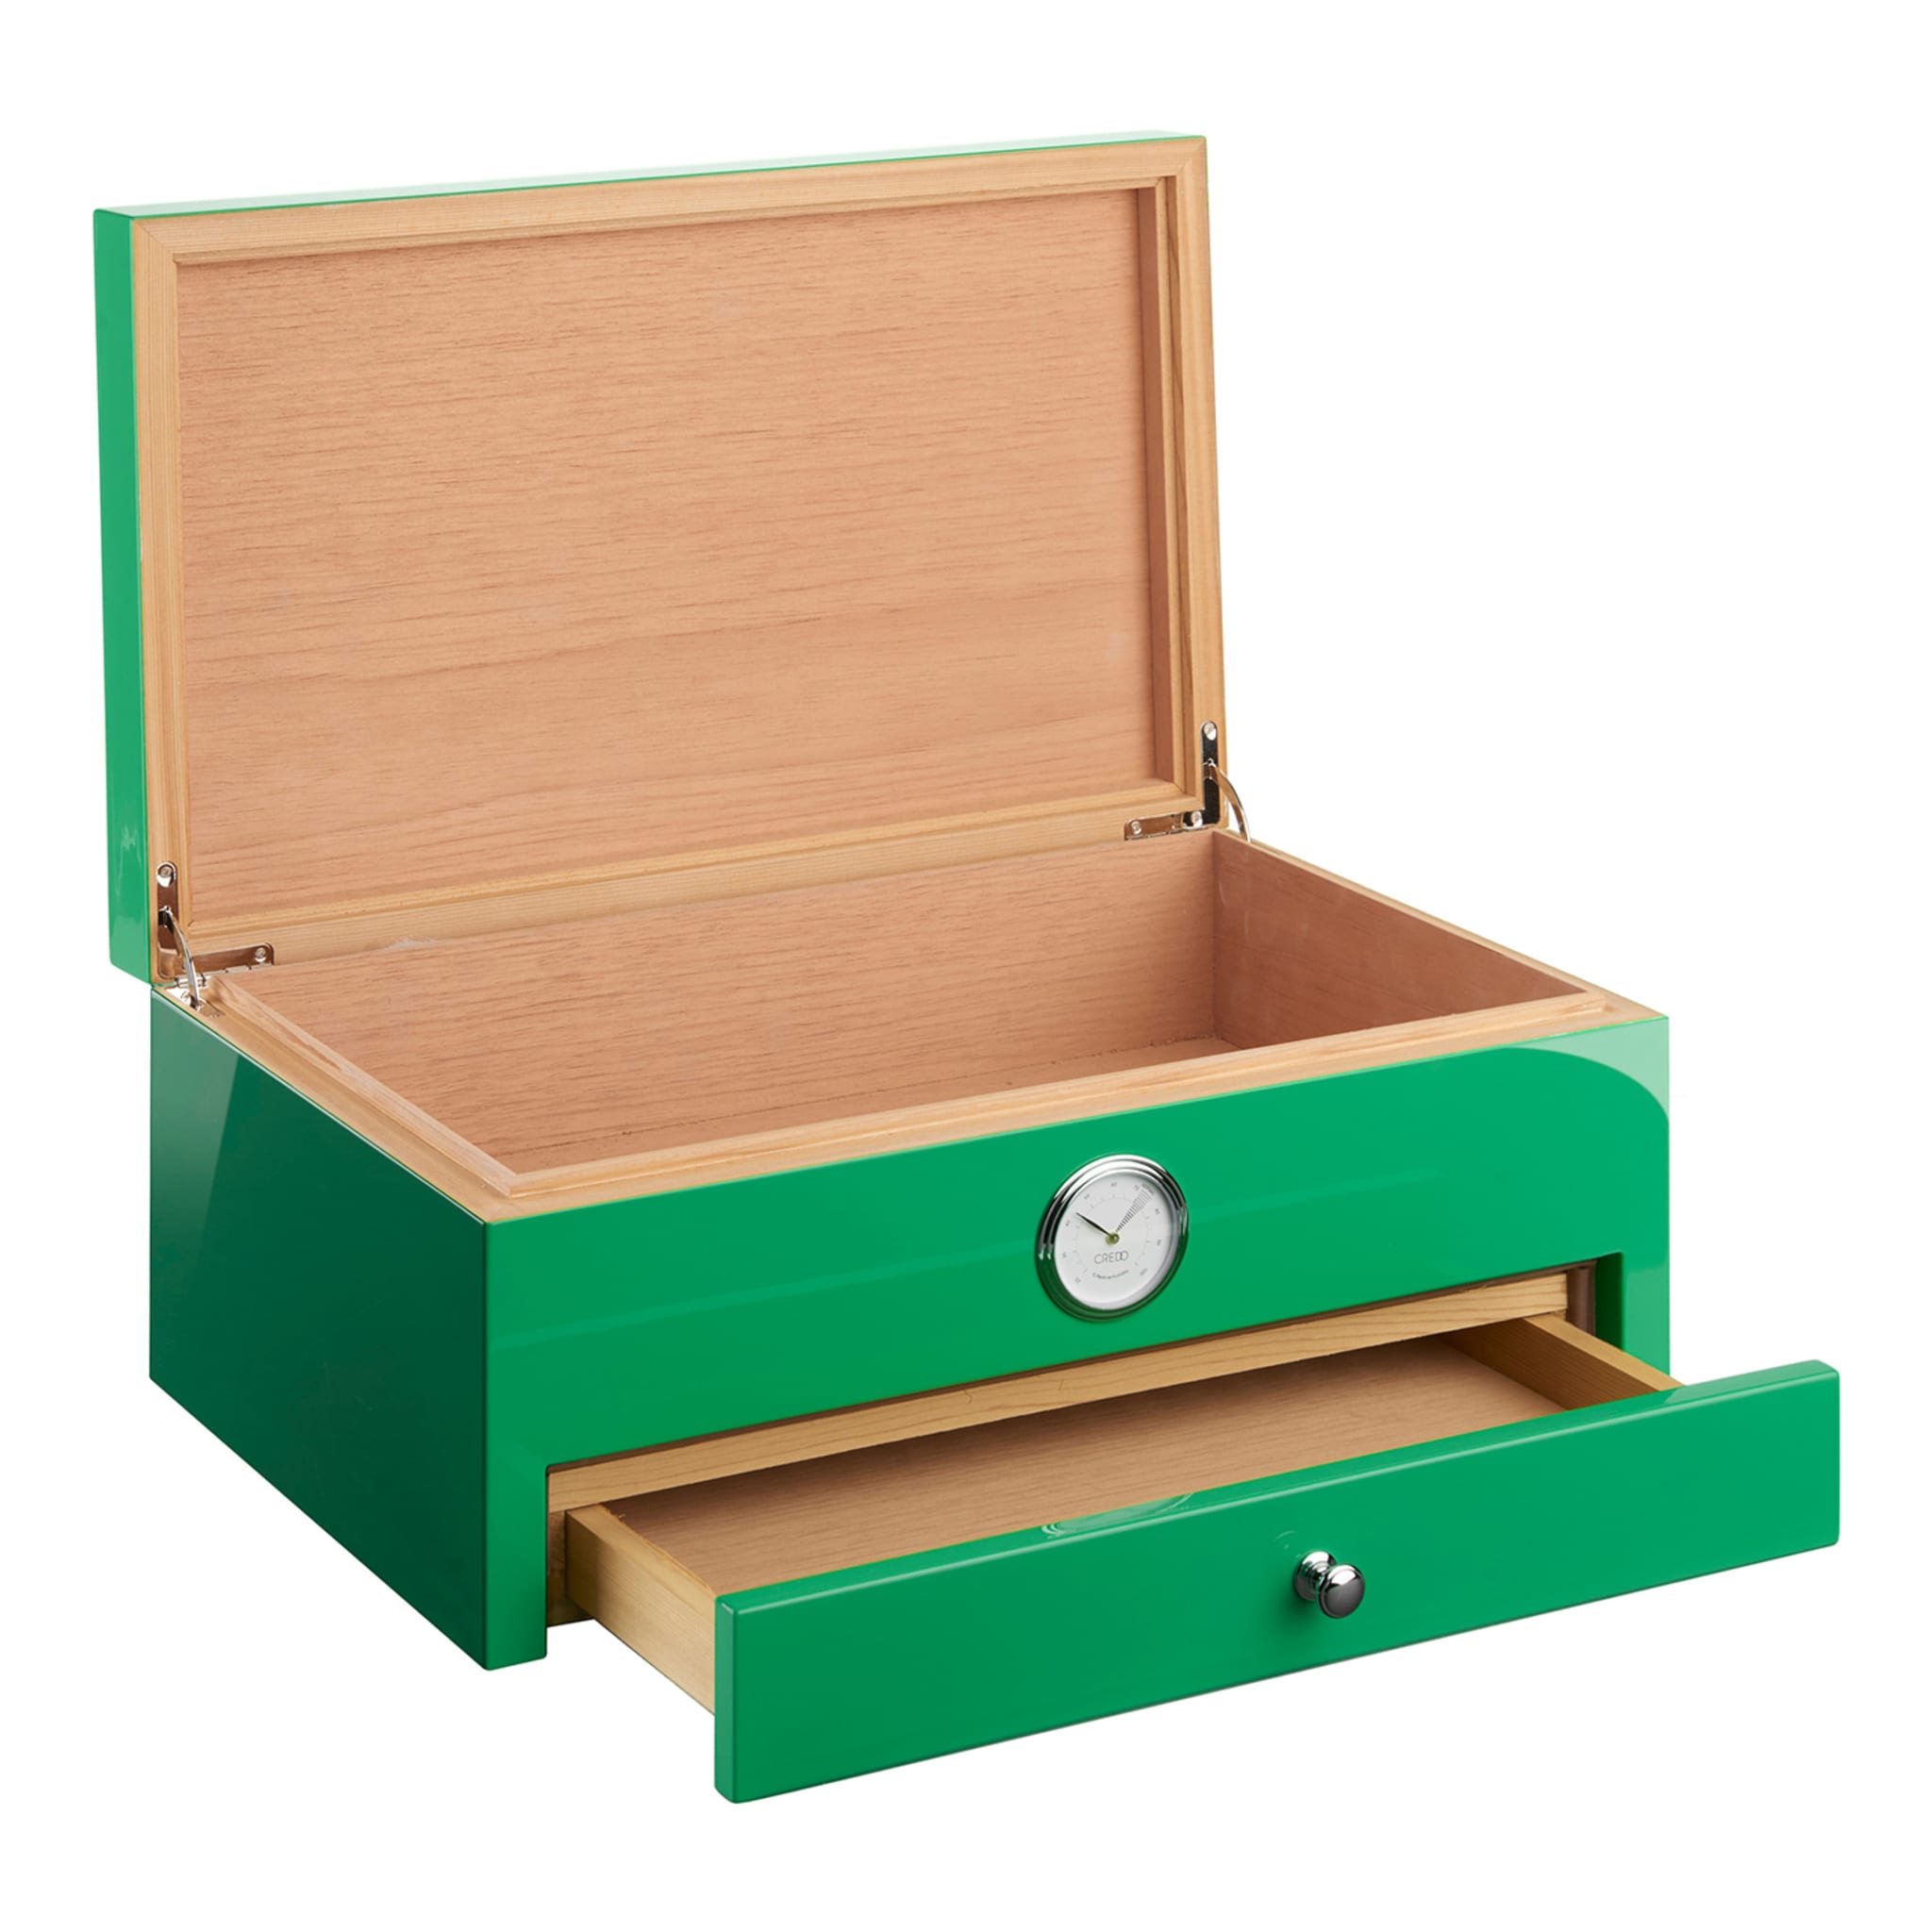 Full Color Green Humidor (Special Club Edition)  - Alternative view 2